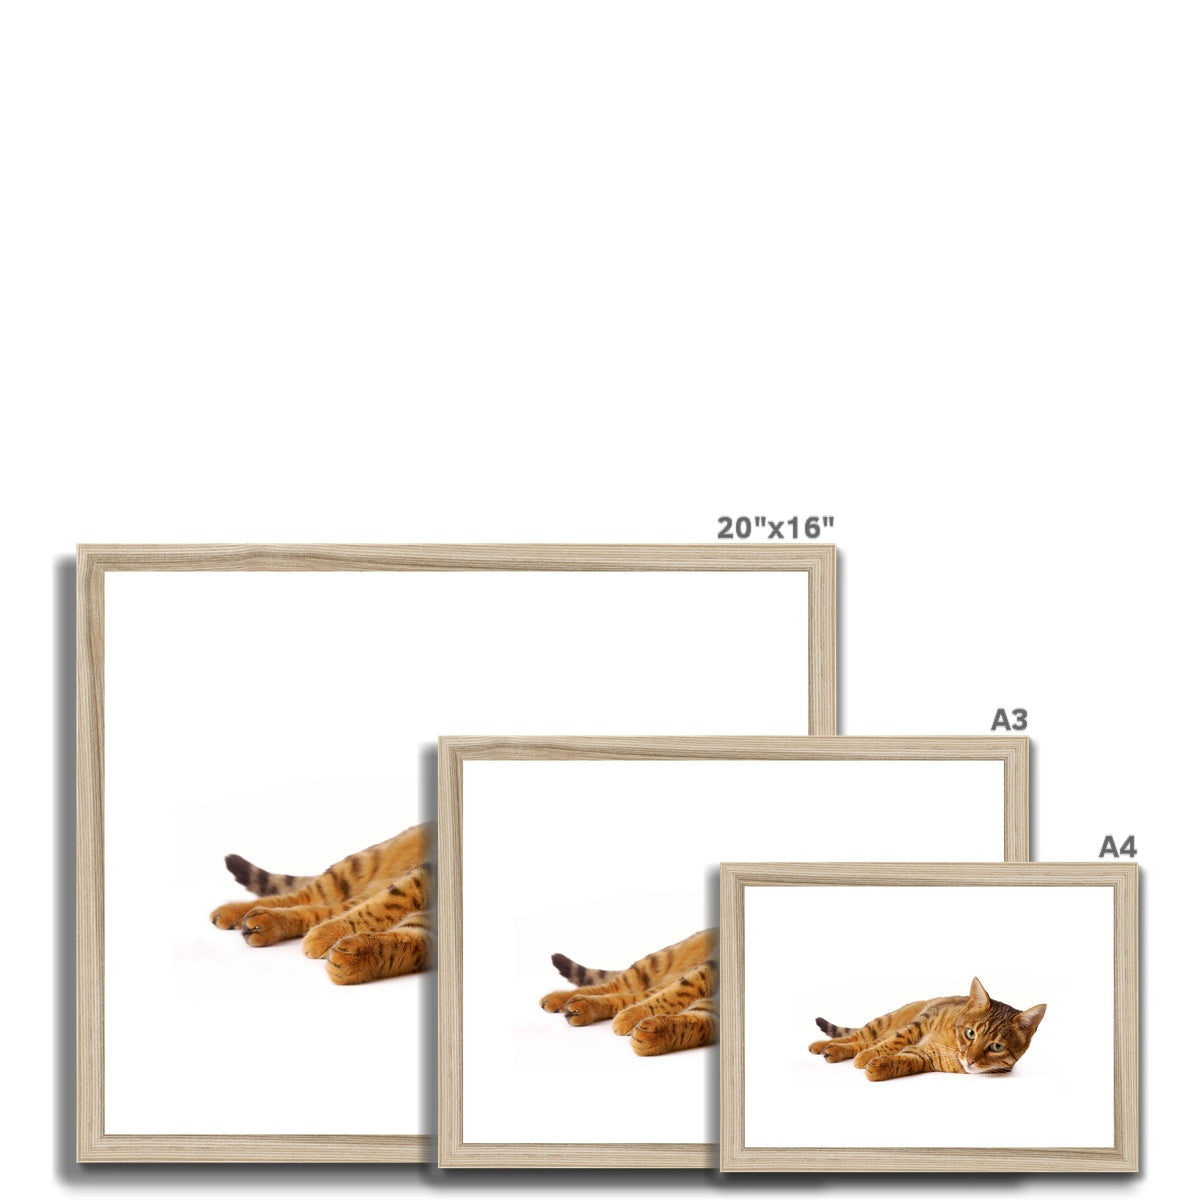 Bengal cat lying on its side on a white background Framed & Mounted Print